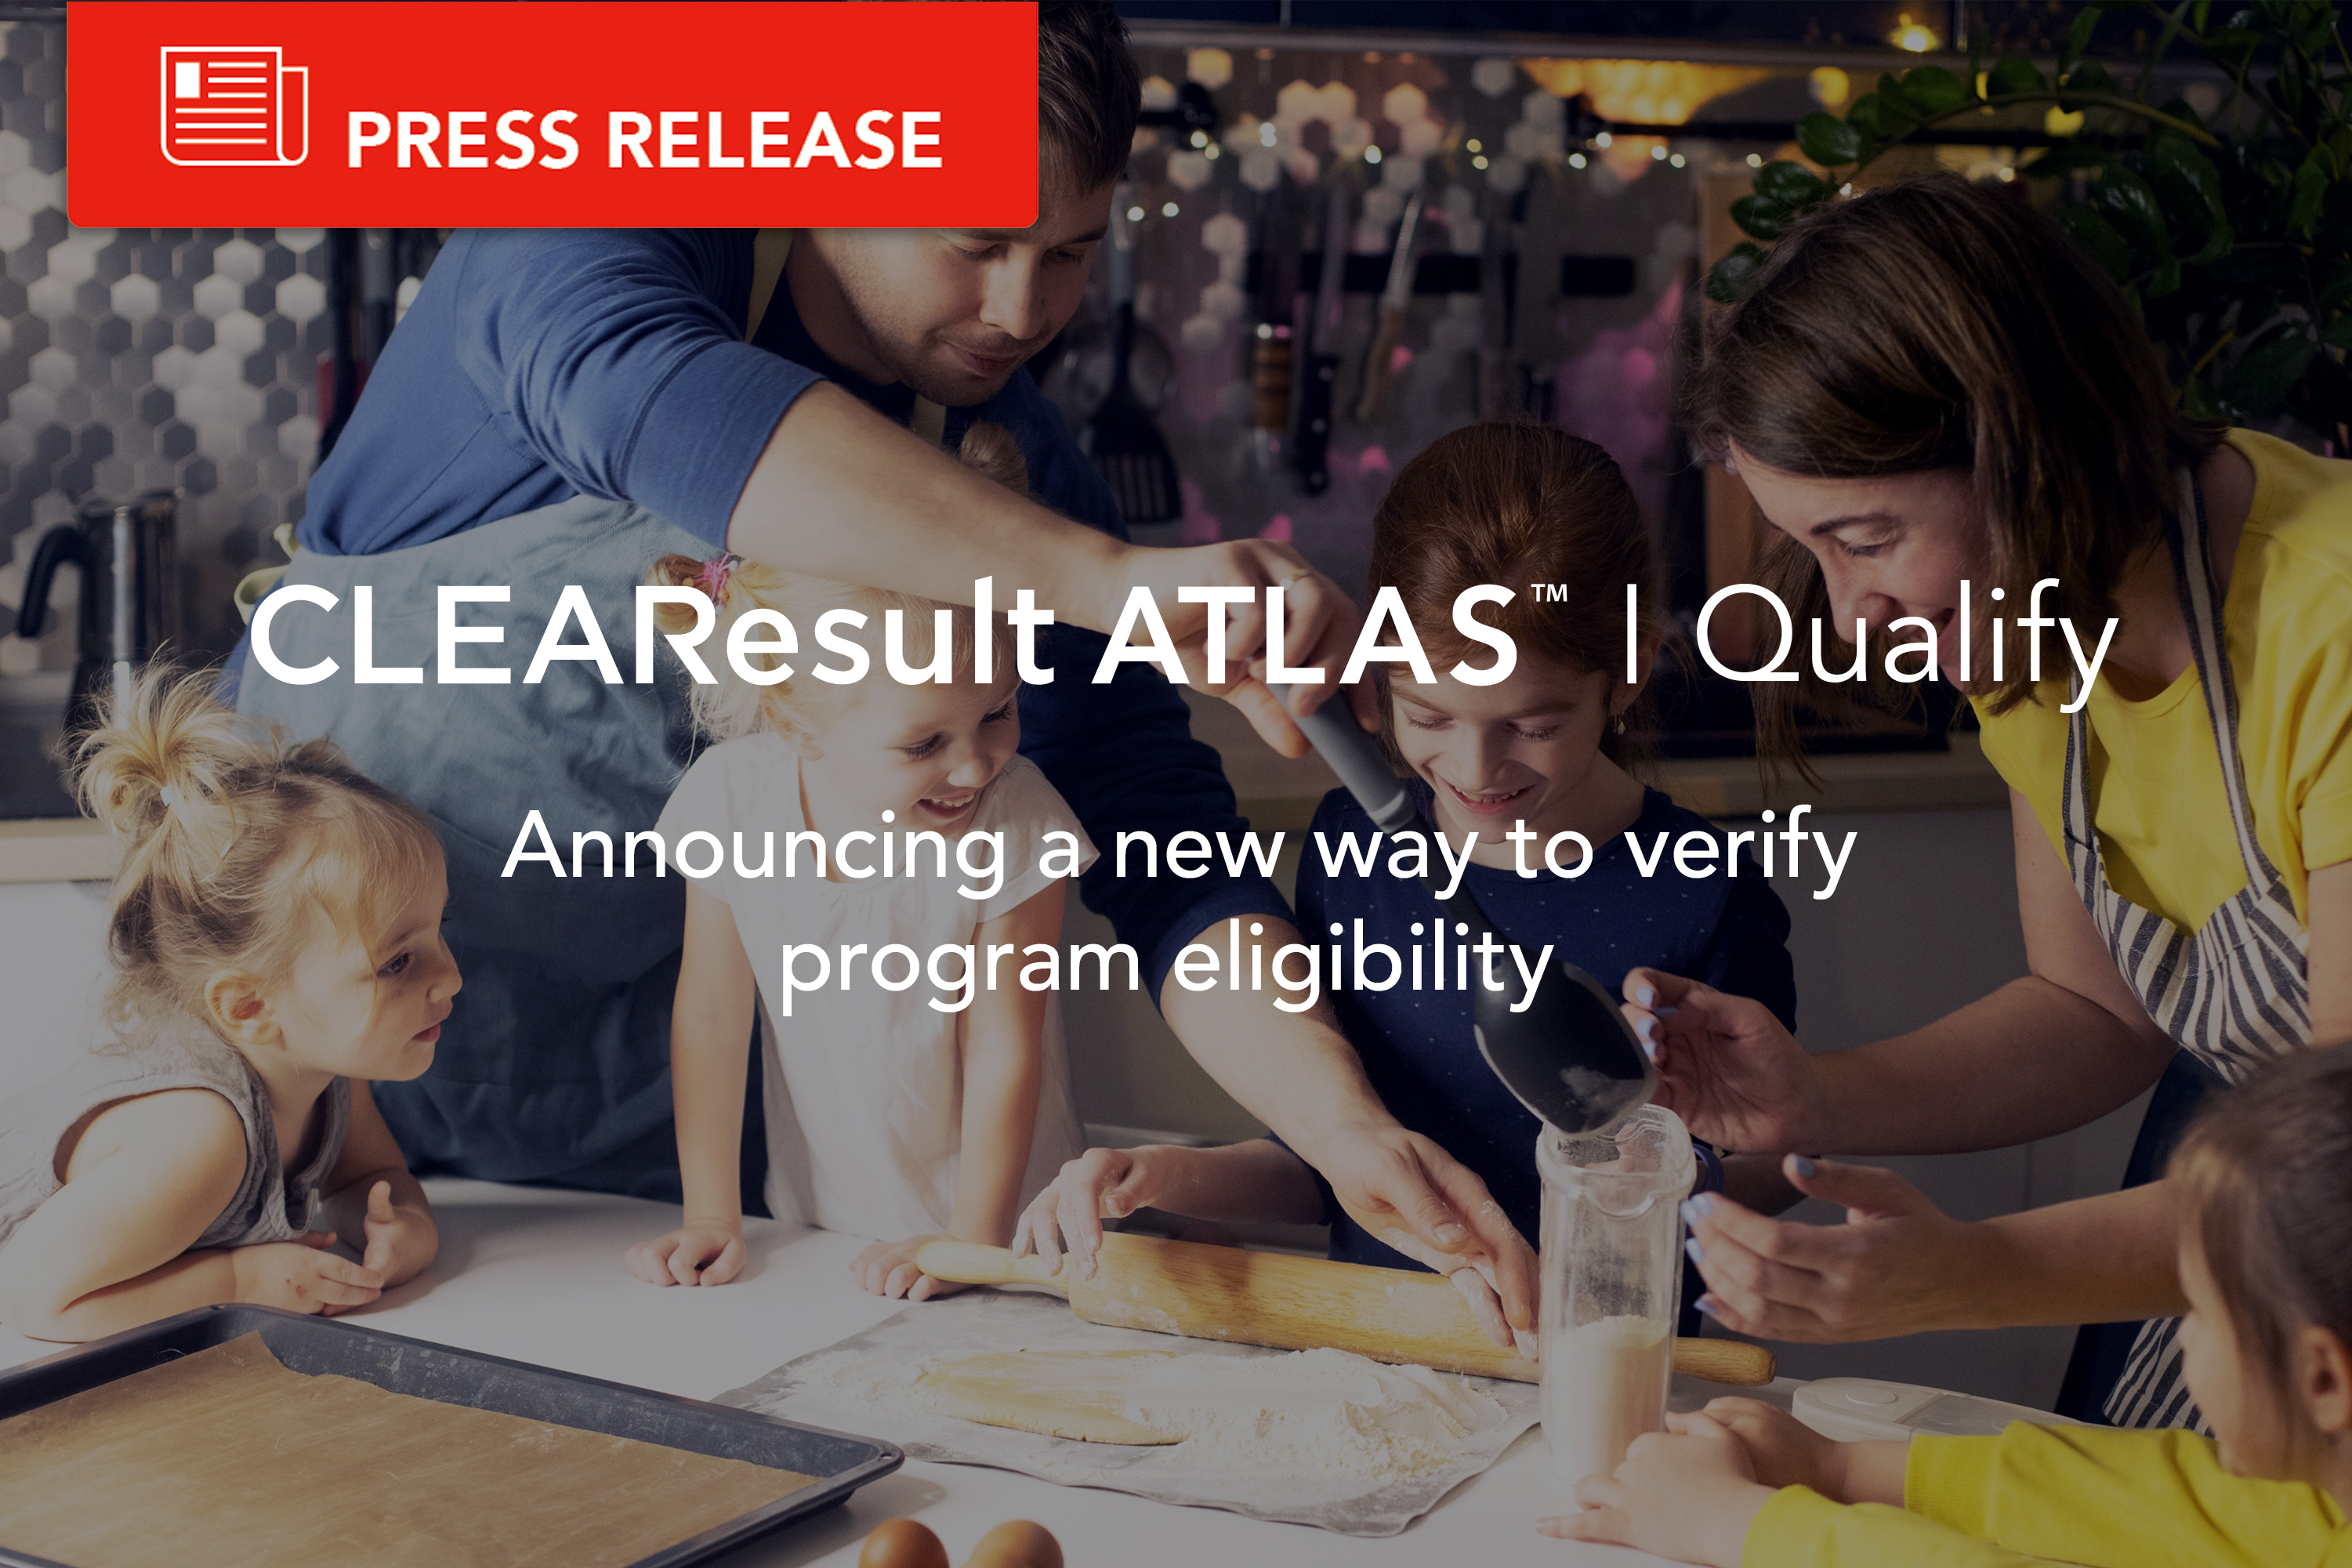 CLEAResult ATLAS™ Qualify brings automation to income-verification for energy efficiency programs